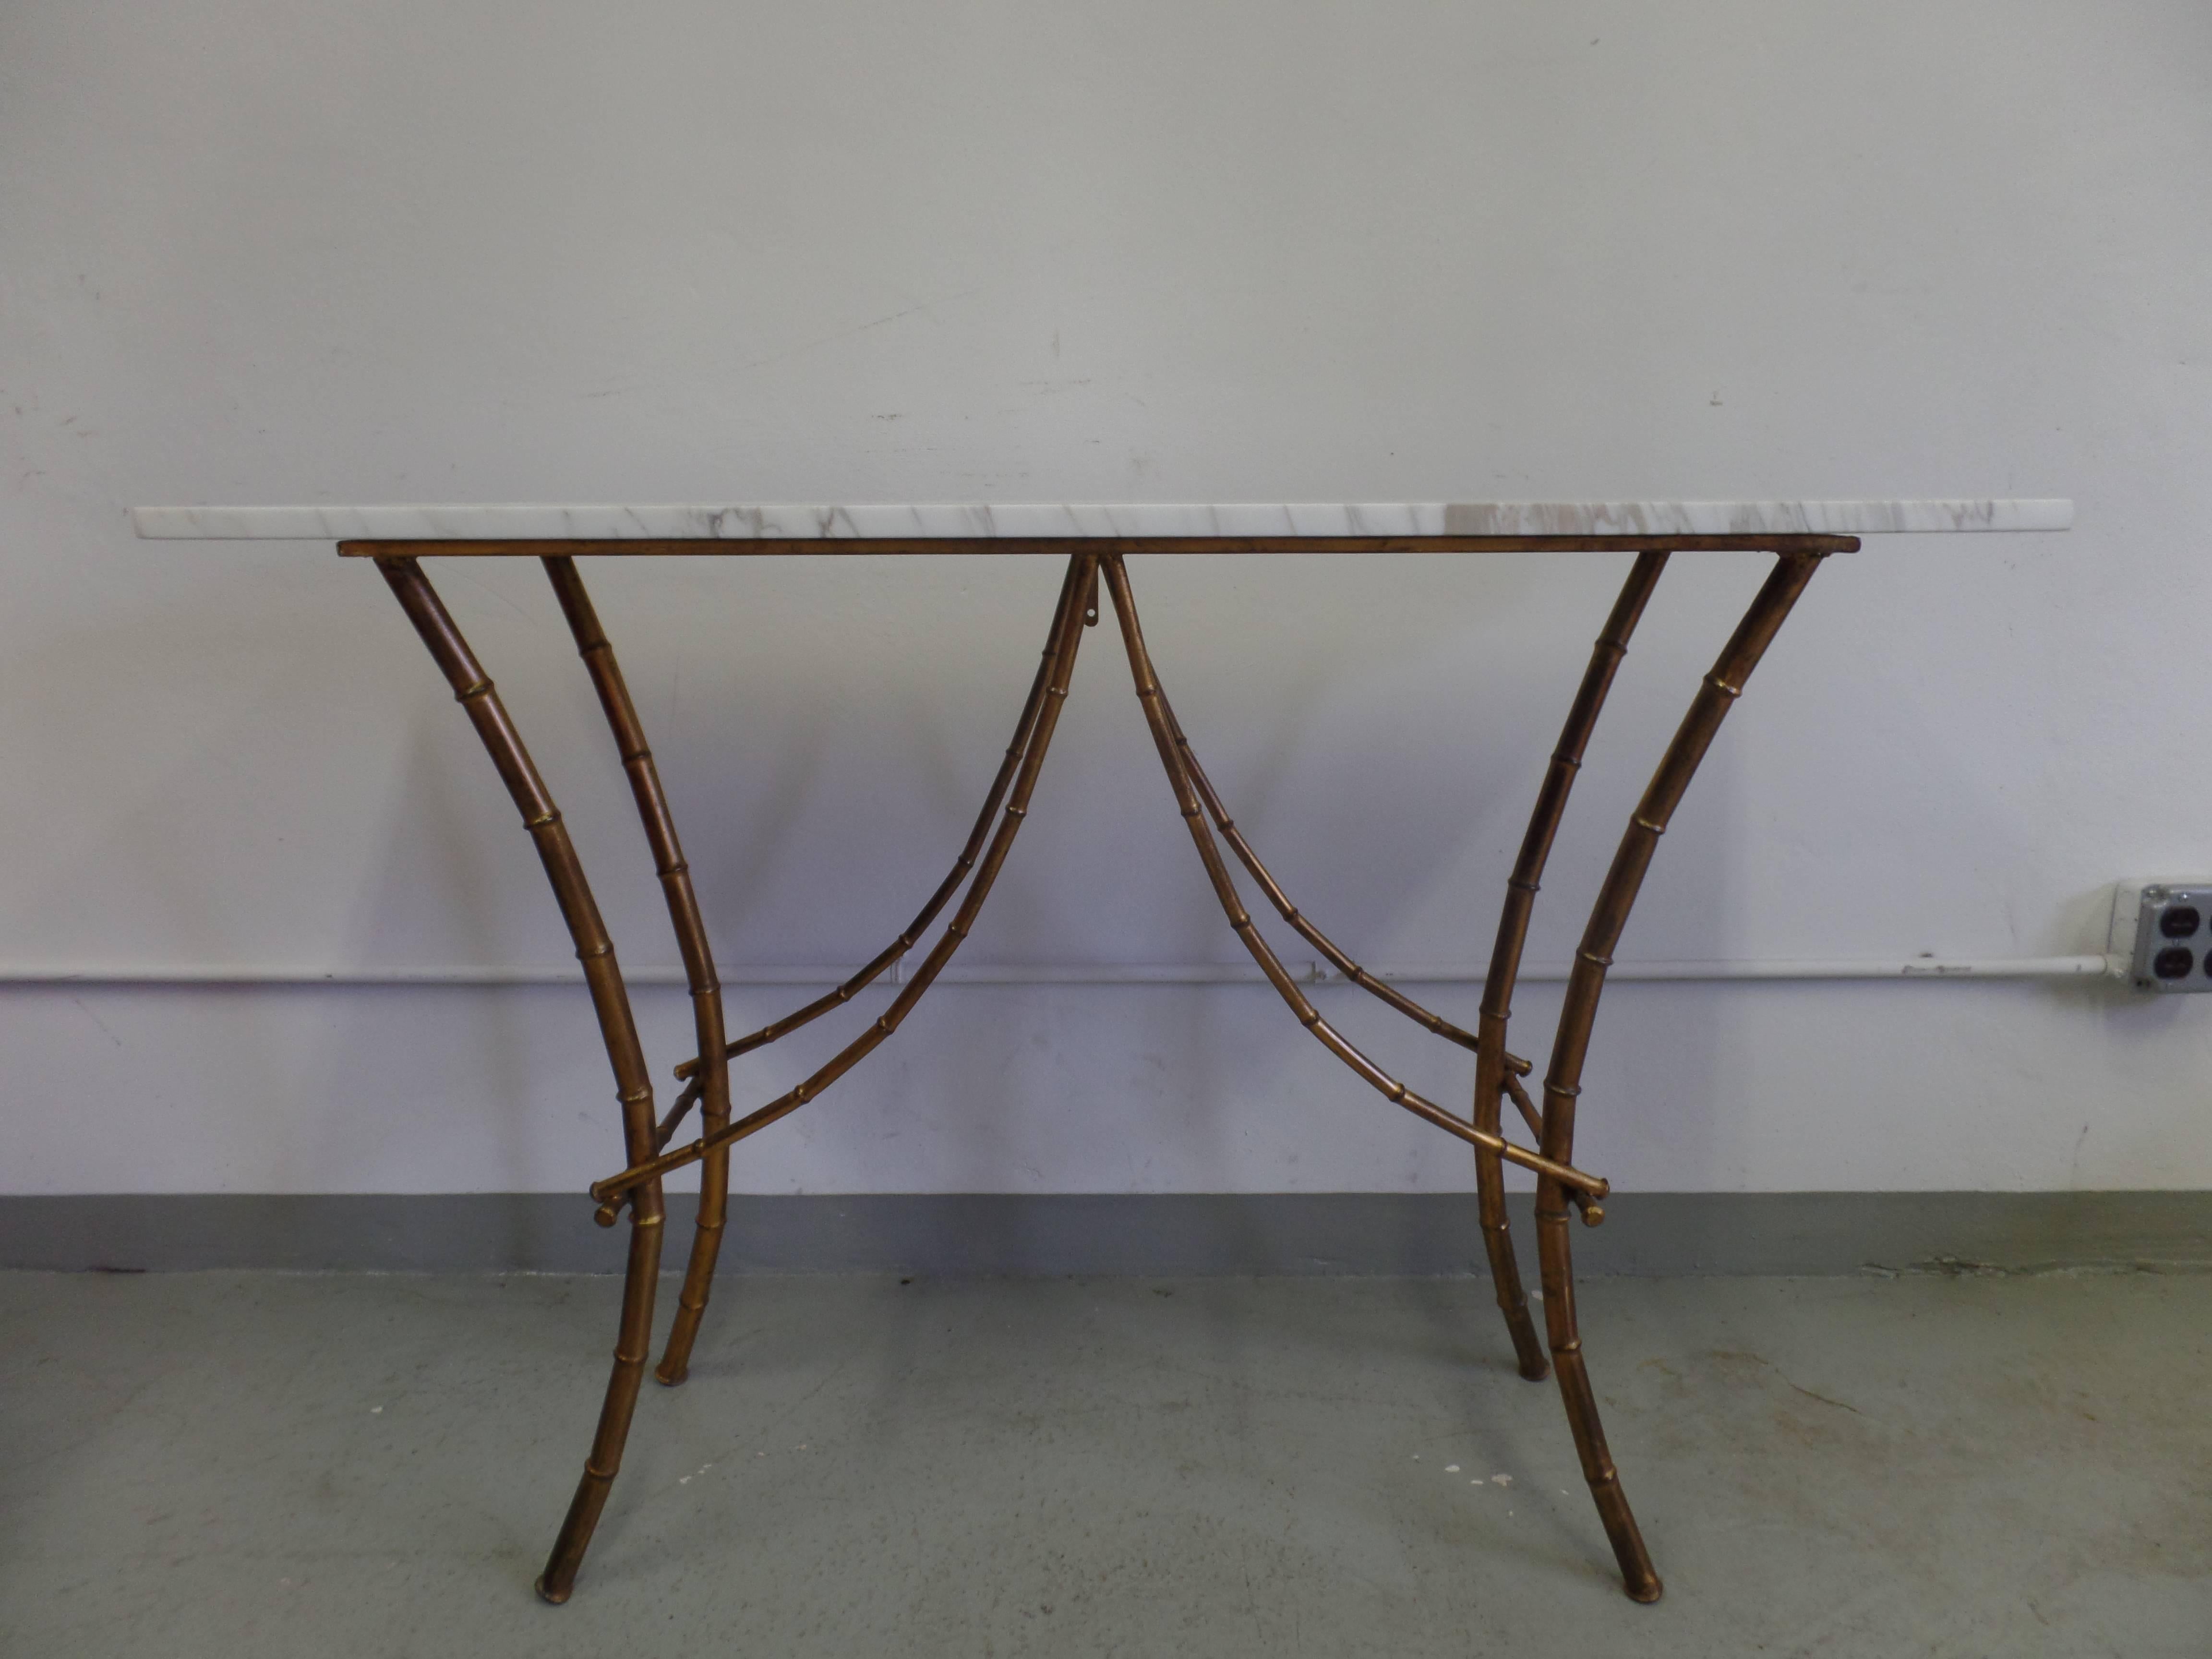 Elegant French Mid-Century console or sofa table by Maison Baguès in the modern neoclassical taste. The table is composed of faux bamboo gilt iron with a patina of gold and bronze shades. It is shown with a delicate marble top of Calacatta crema.